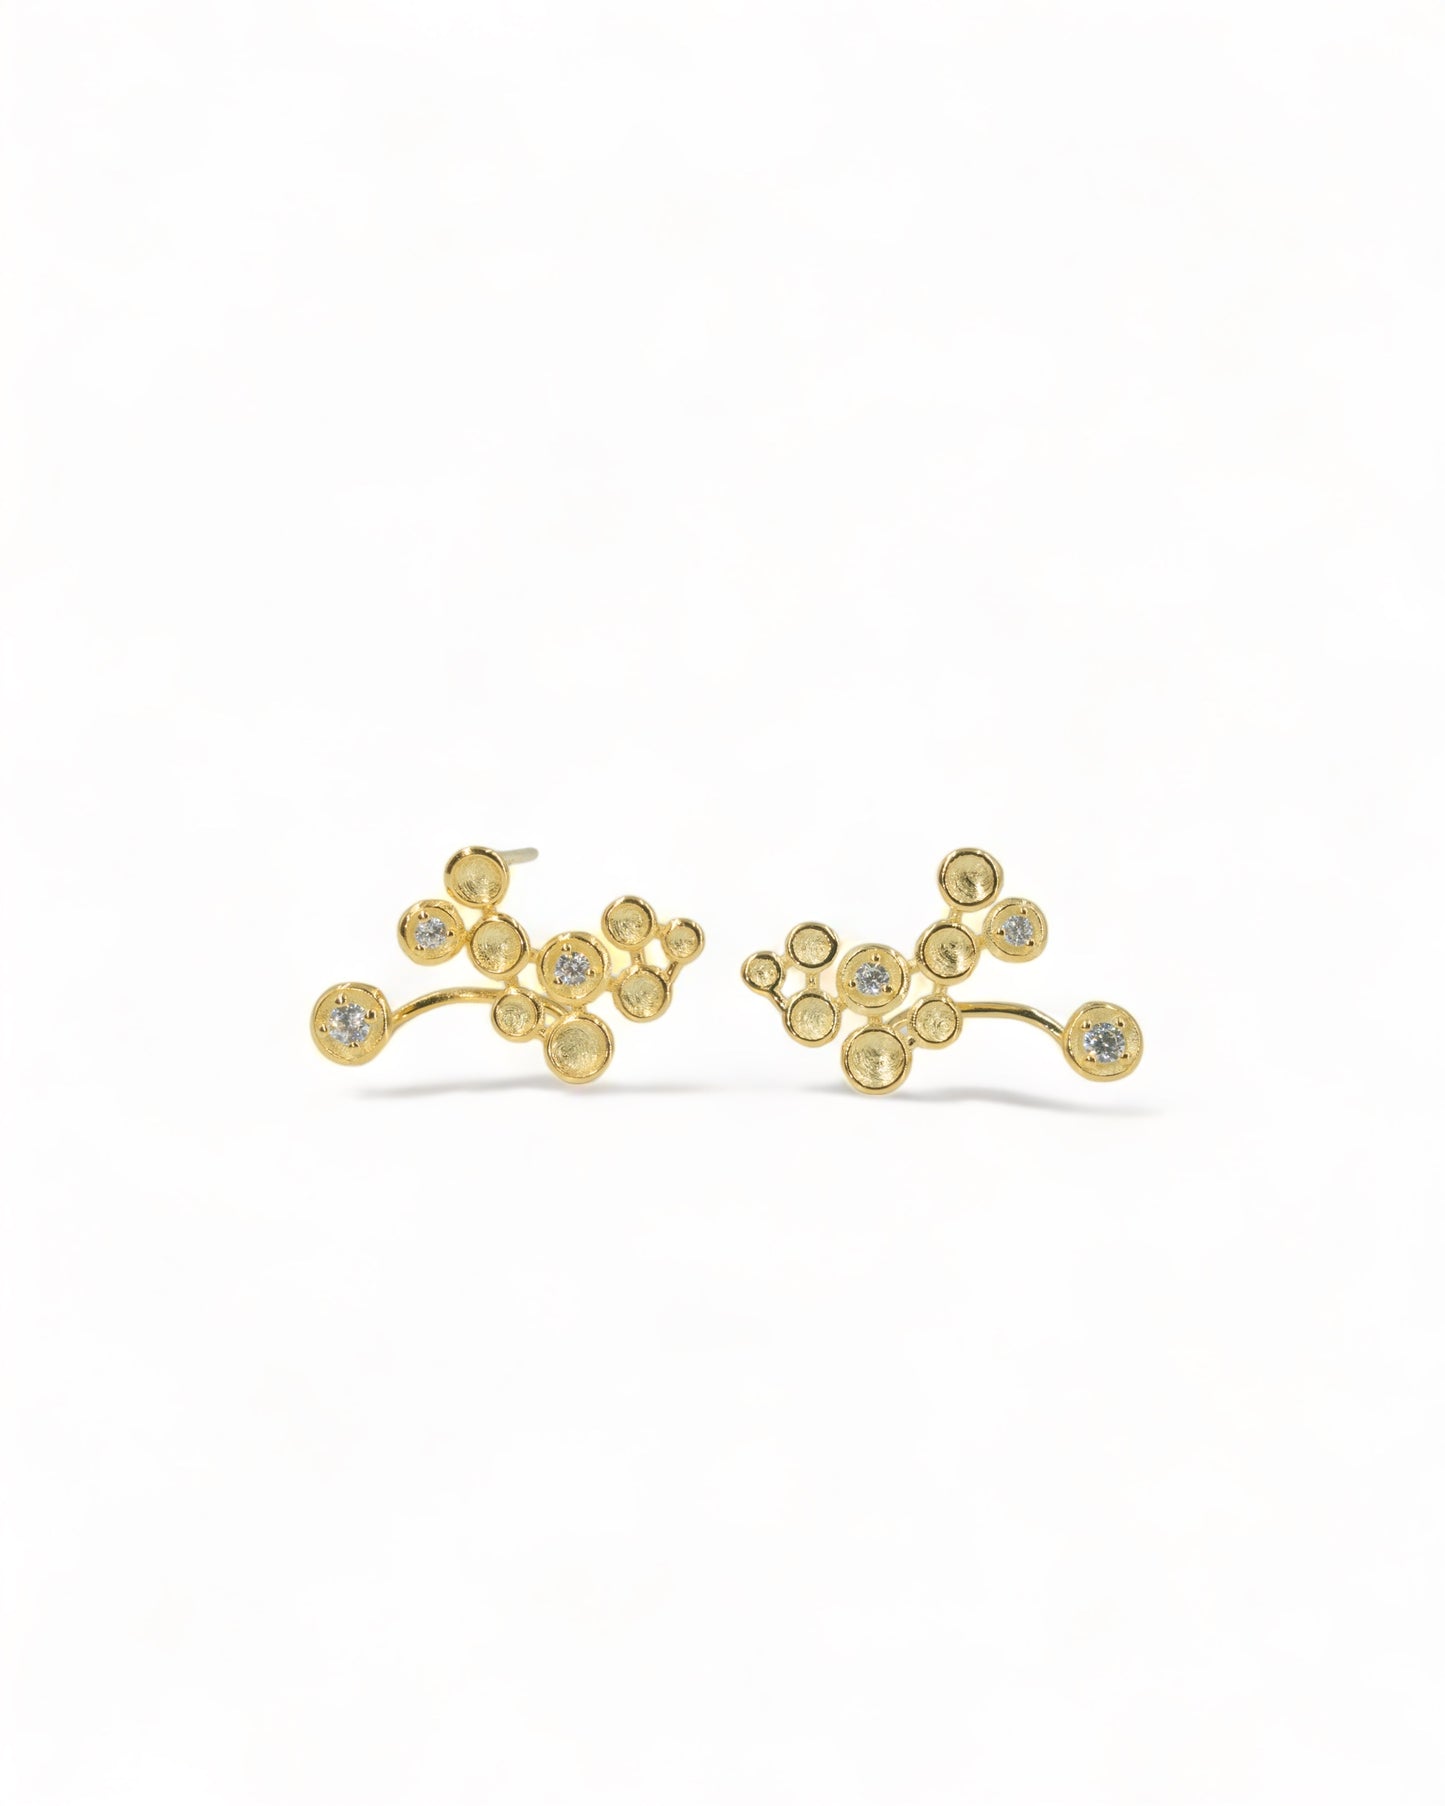 Floating Gold Speckled Earrings